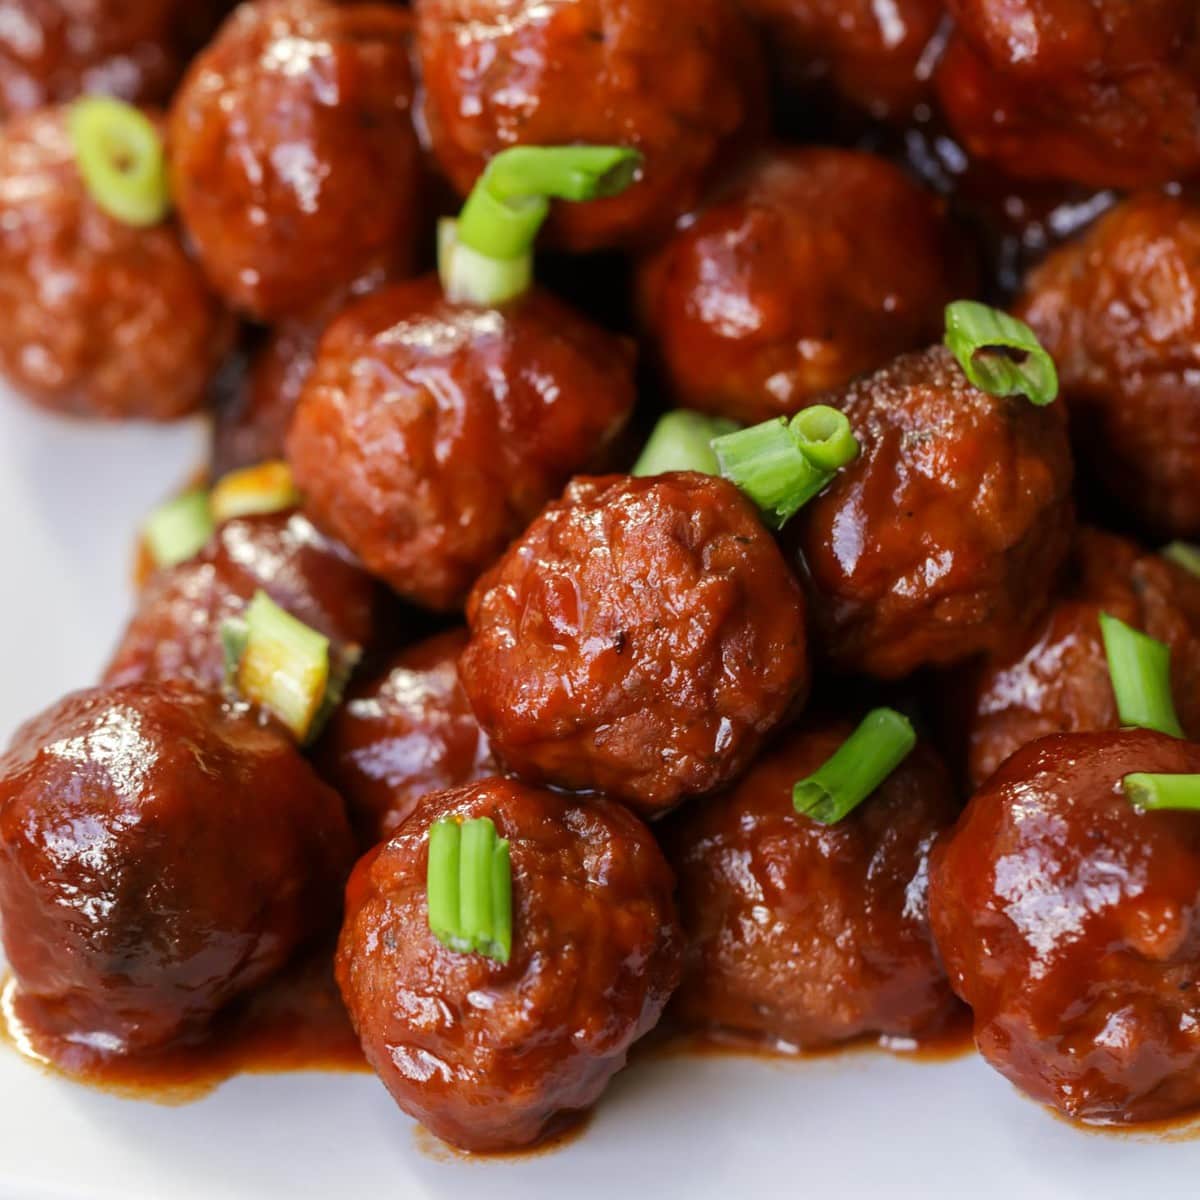 Crock Pot Appetizers - Slow Cooker Grape Jelly meatballs garnished with chopped green onions on a white plate.